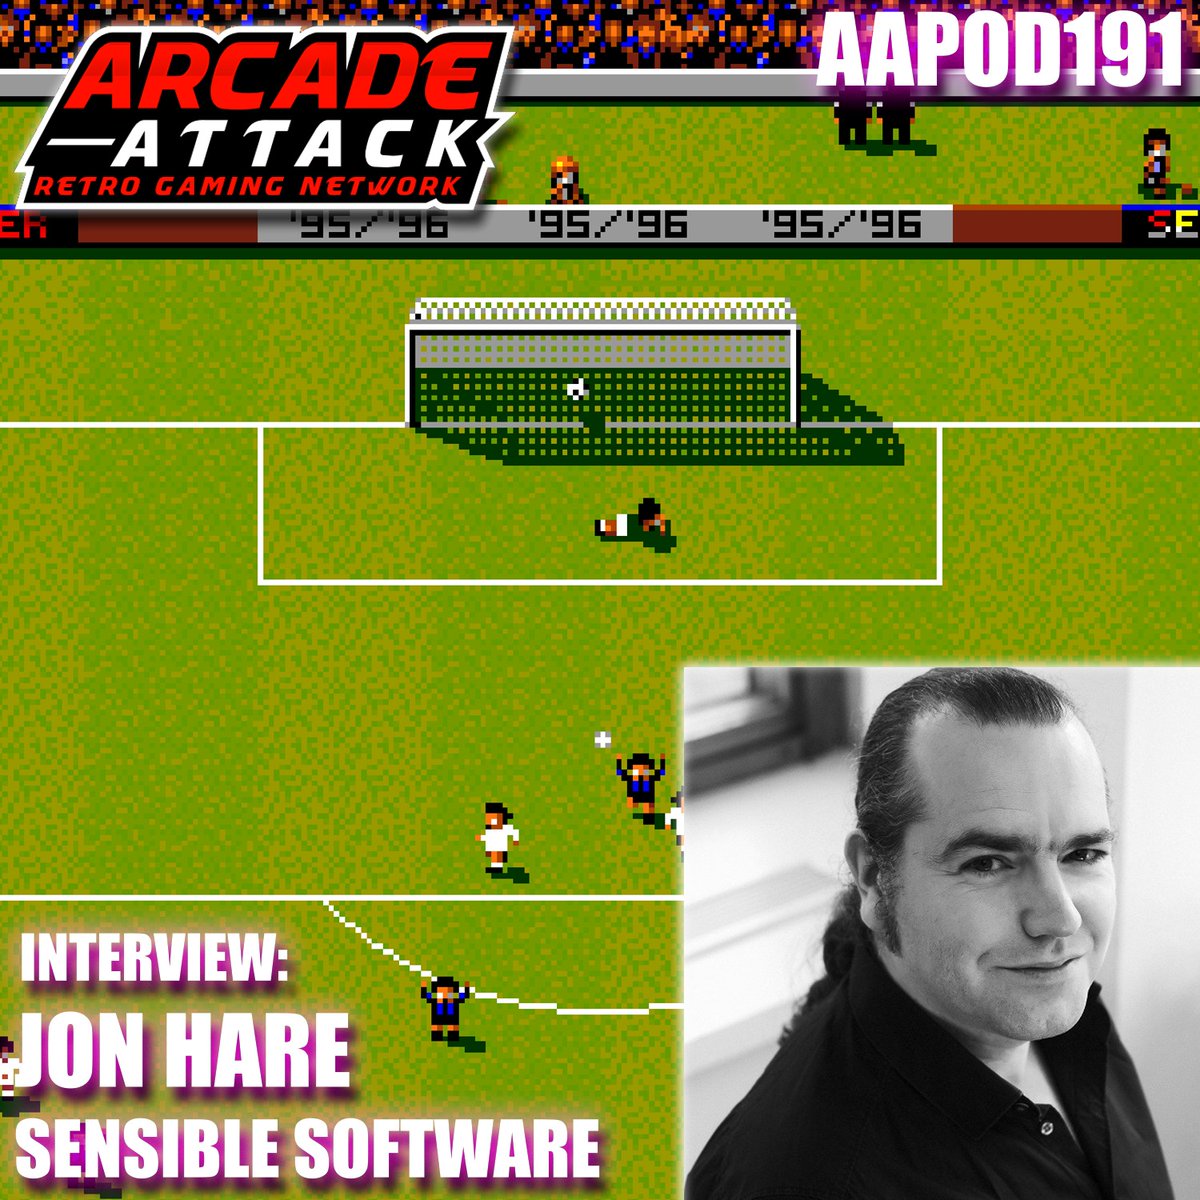 Is SWOS the best footy game on the Amiga? What is your favourite Sensible Software title? The legendary @jonhare helped create so many Amiga classics. Enjoy this fun pod with Jon, as he discusses working on classic titles & creating Sociable Software! open.spotify.com/episode/3pyr41…